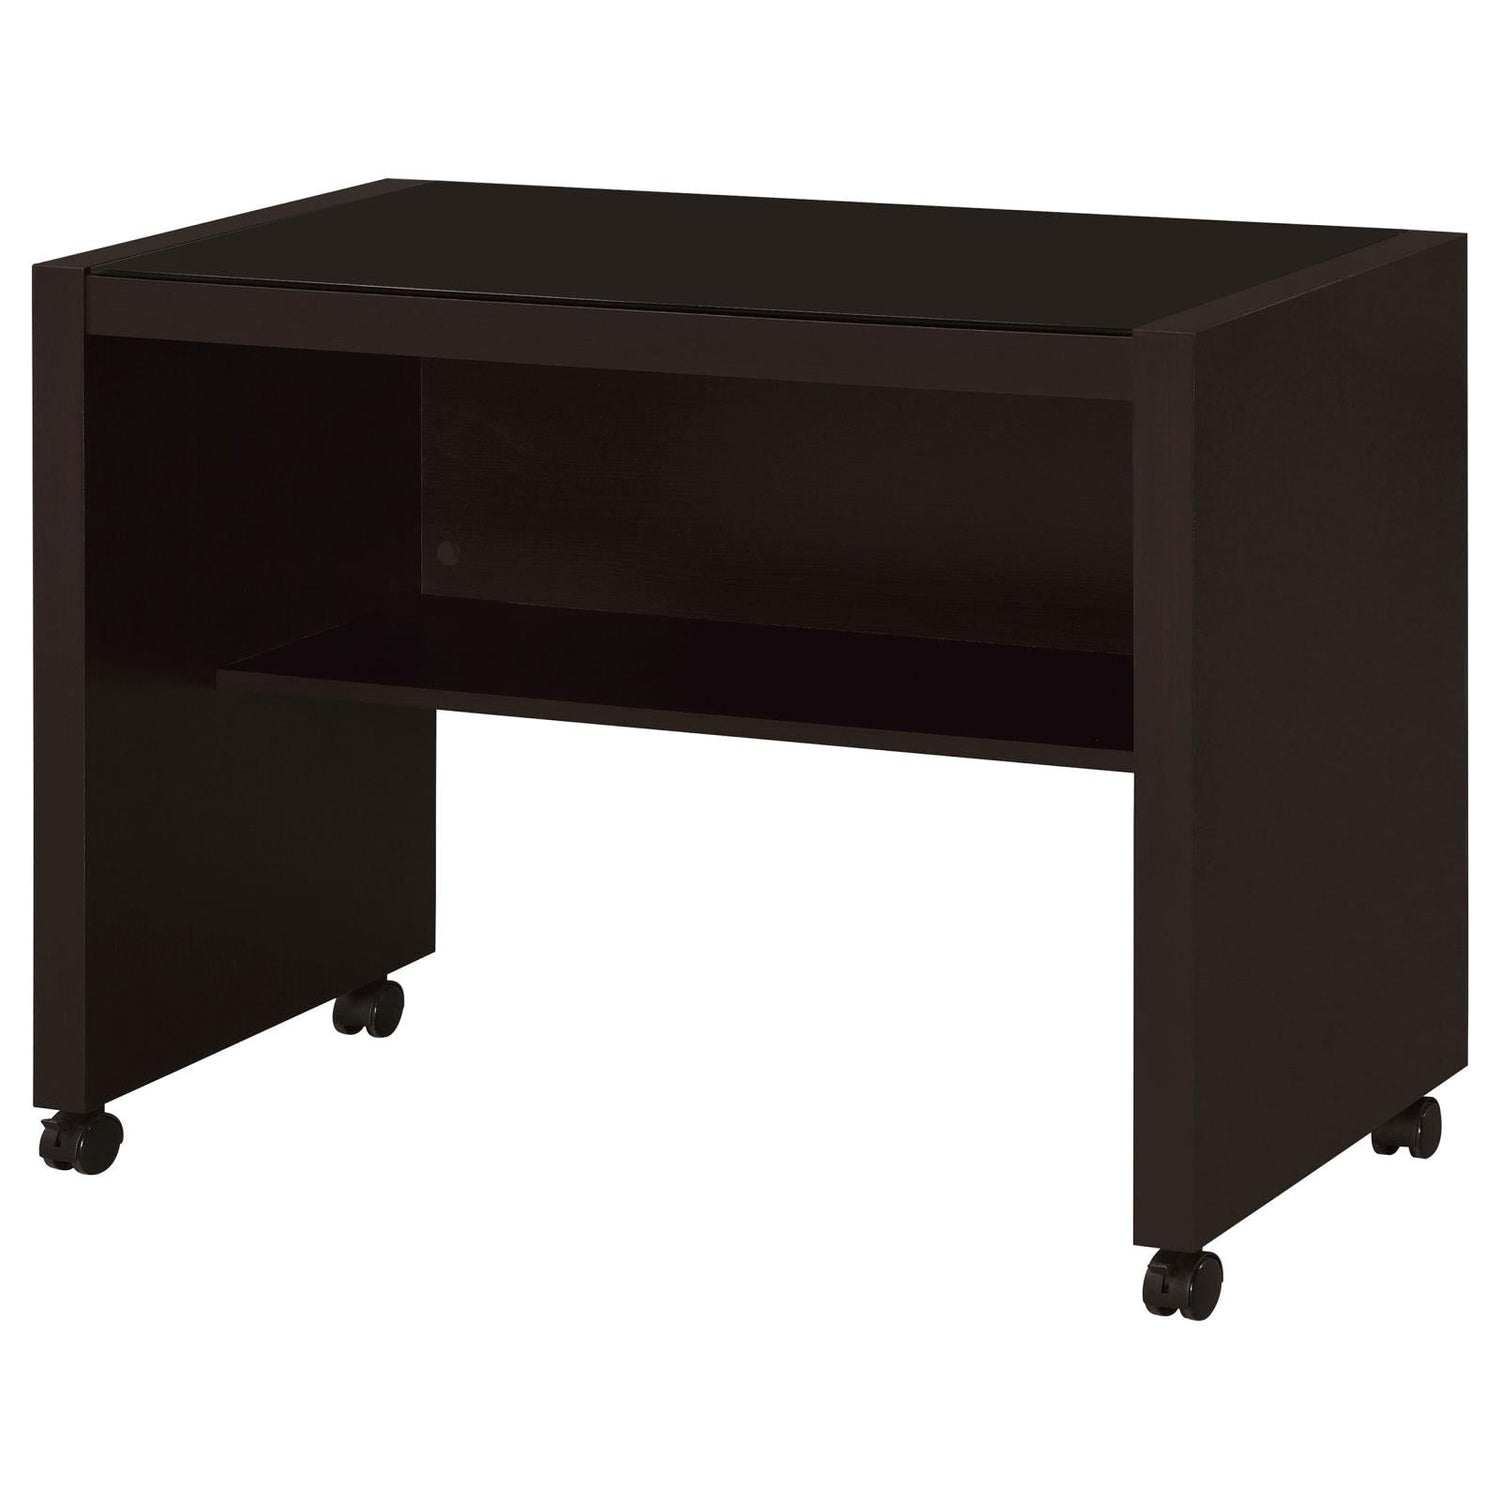 Skeena Cappuccino Mobile Return with Casters - 800902 - Bien Home Furniture &amp; Electronics